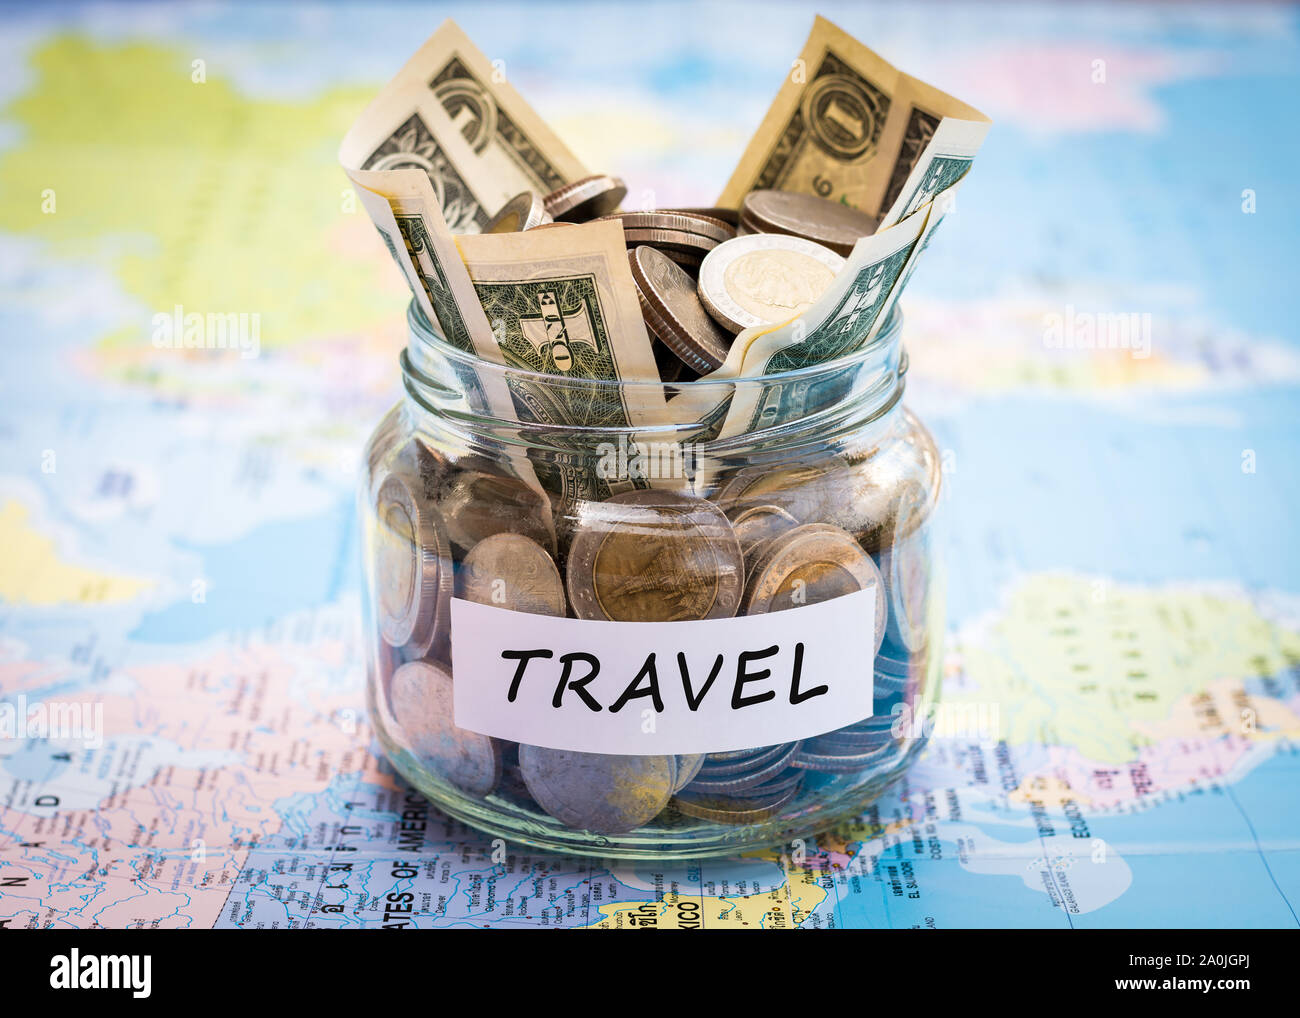 Travel budget concept. Travel money savings in a glass jar on world map Stock Photo